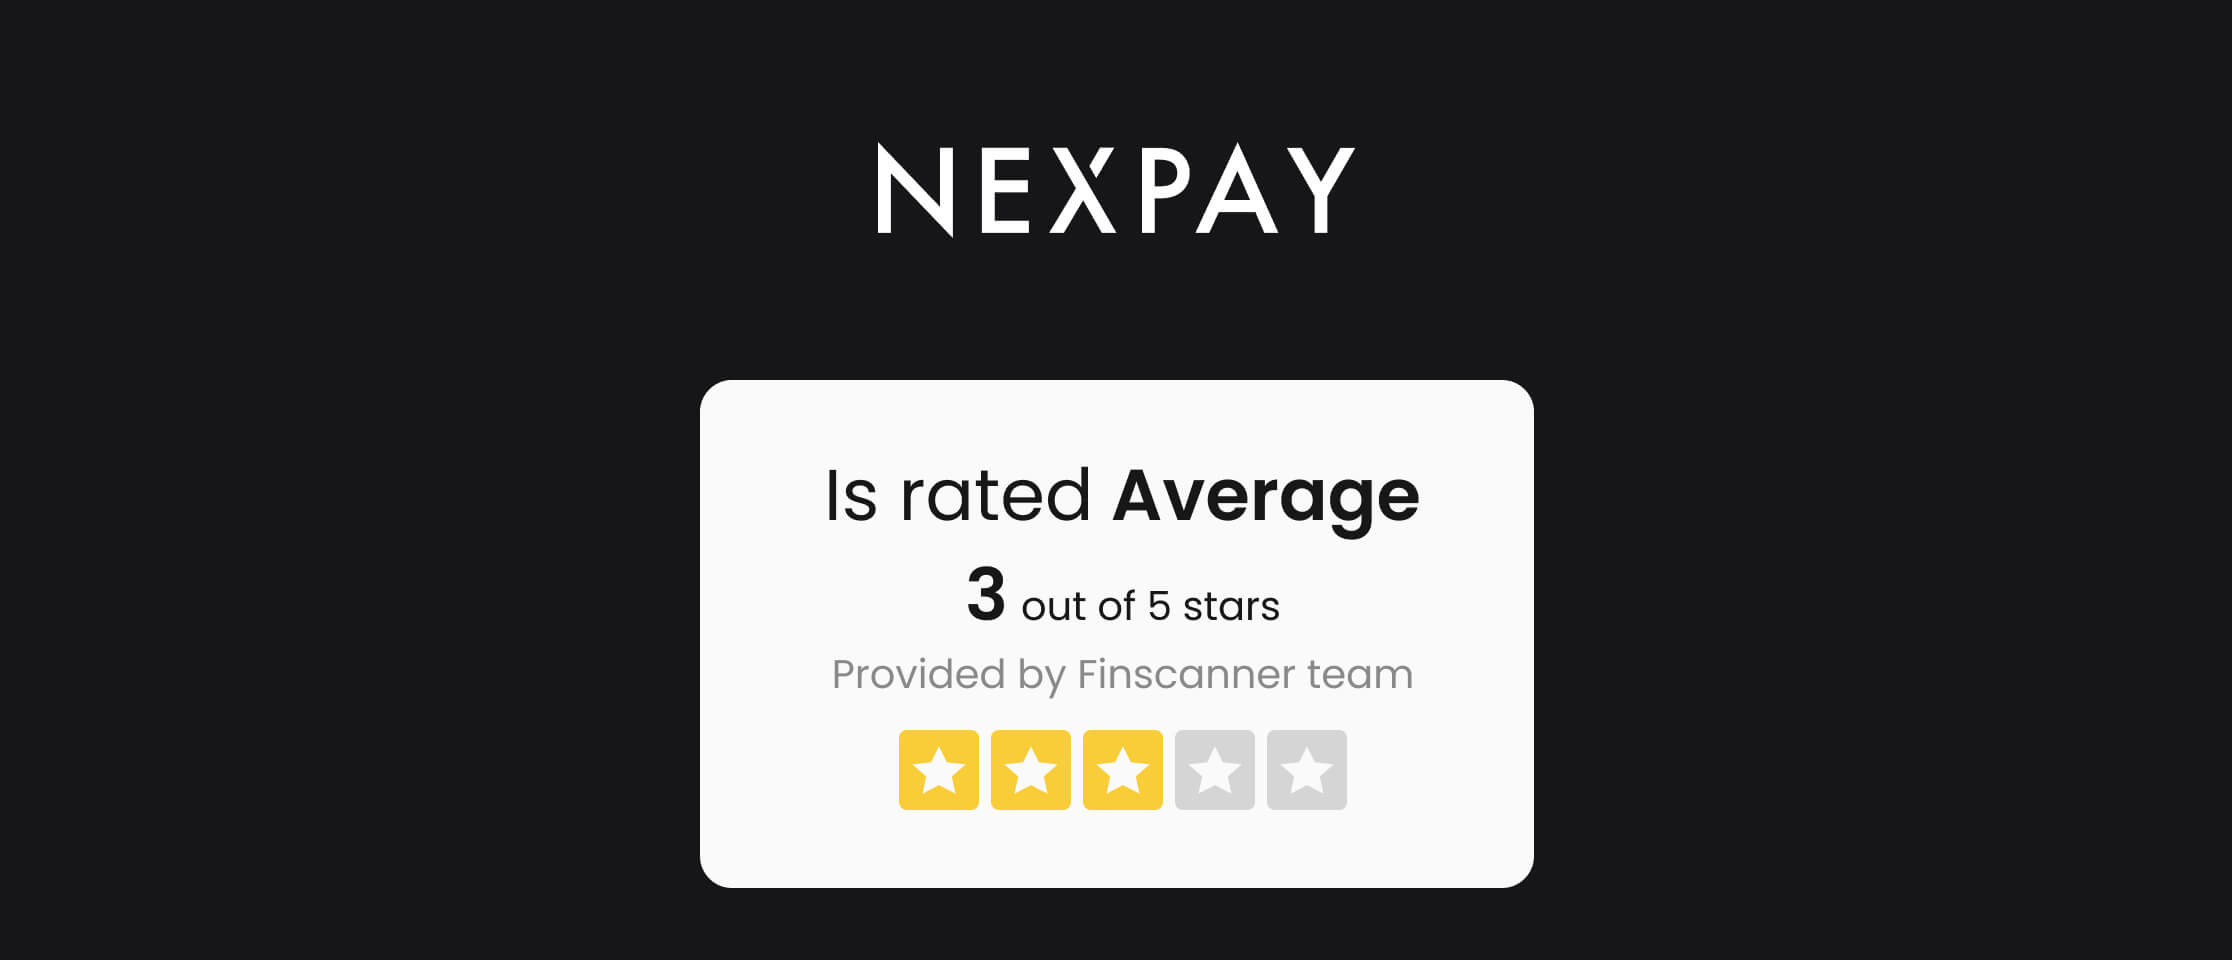 Review of Nexpay — Next generation financial infrastructure for the digital business world